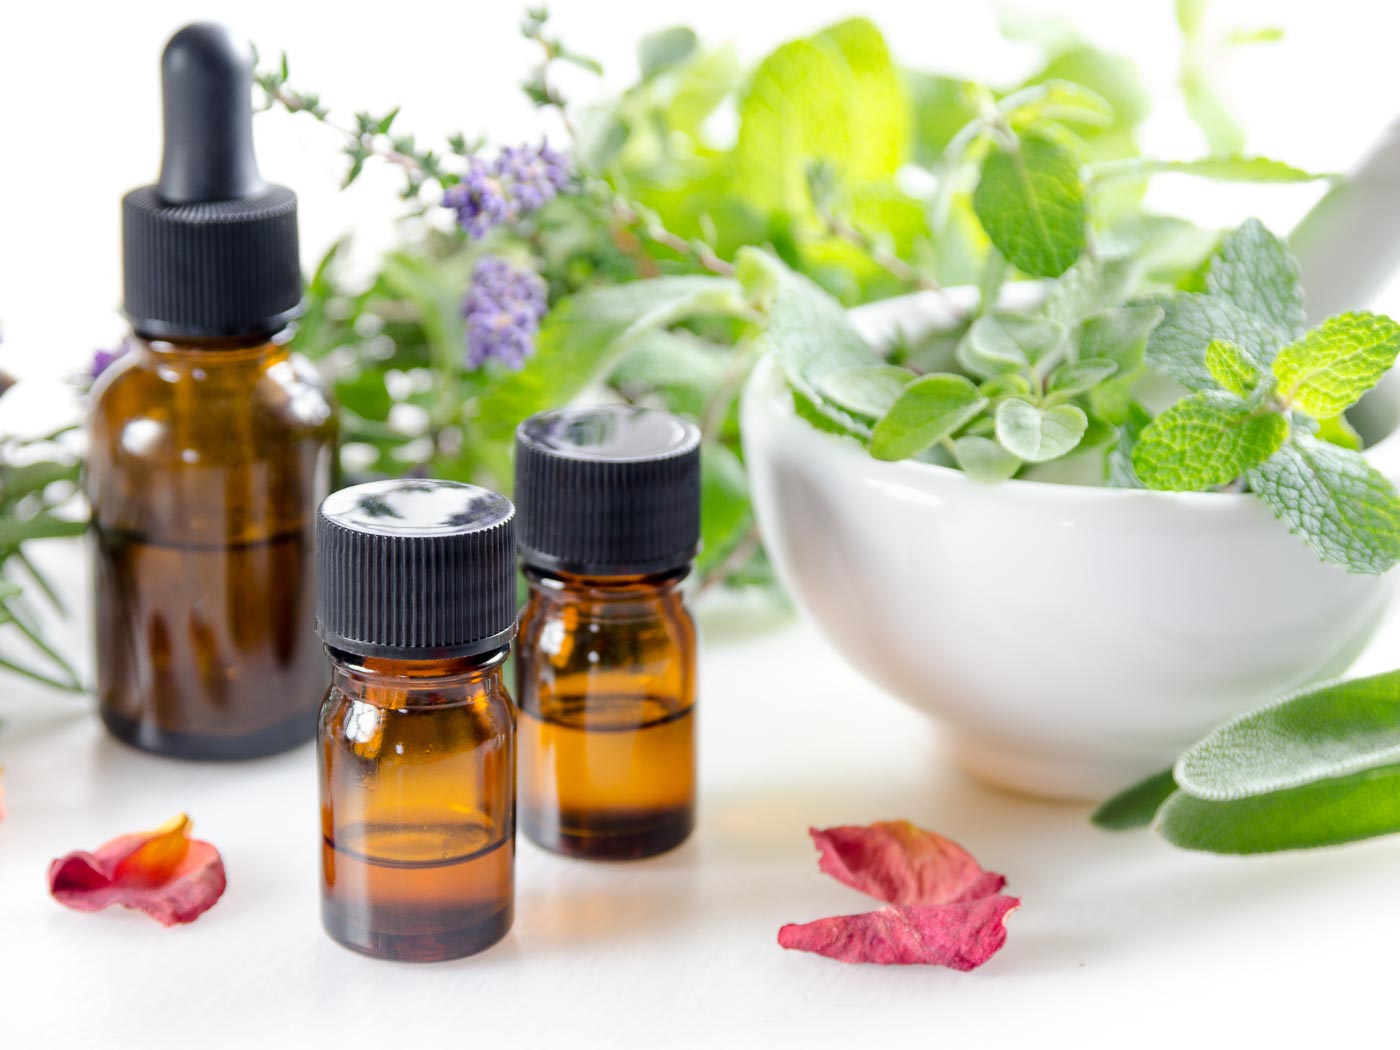 alternative therapy with herbs and essential oils - Bliibgsund.